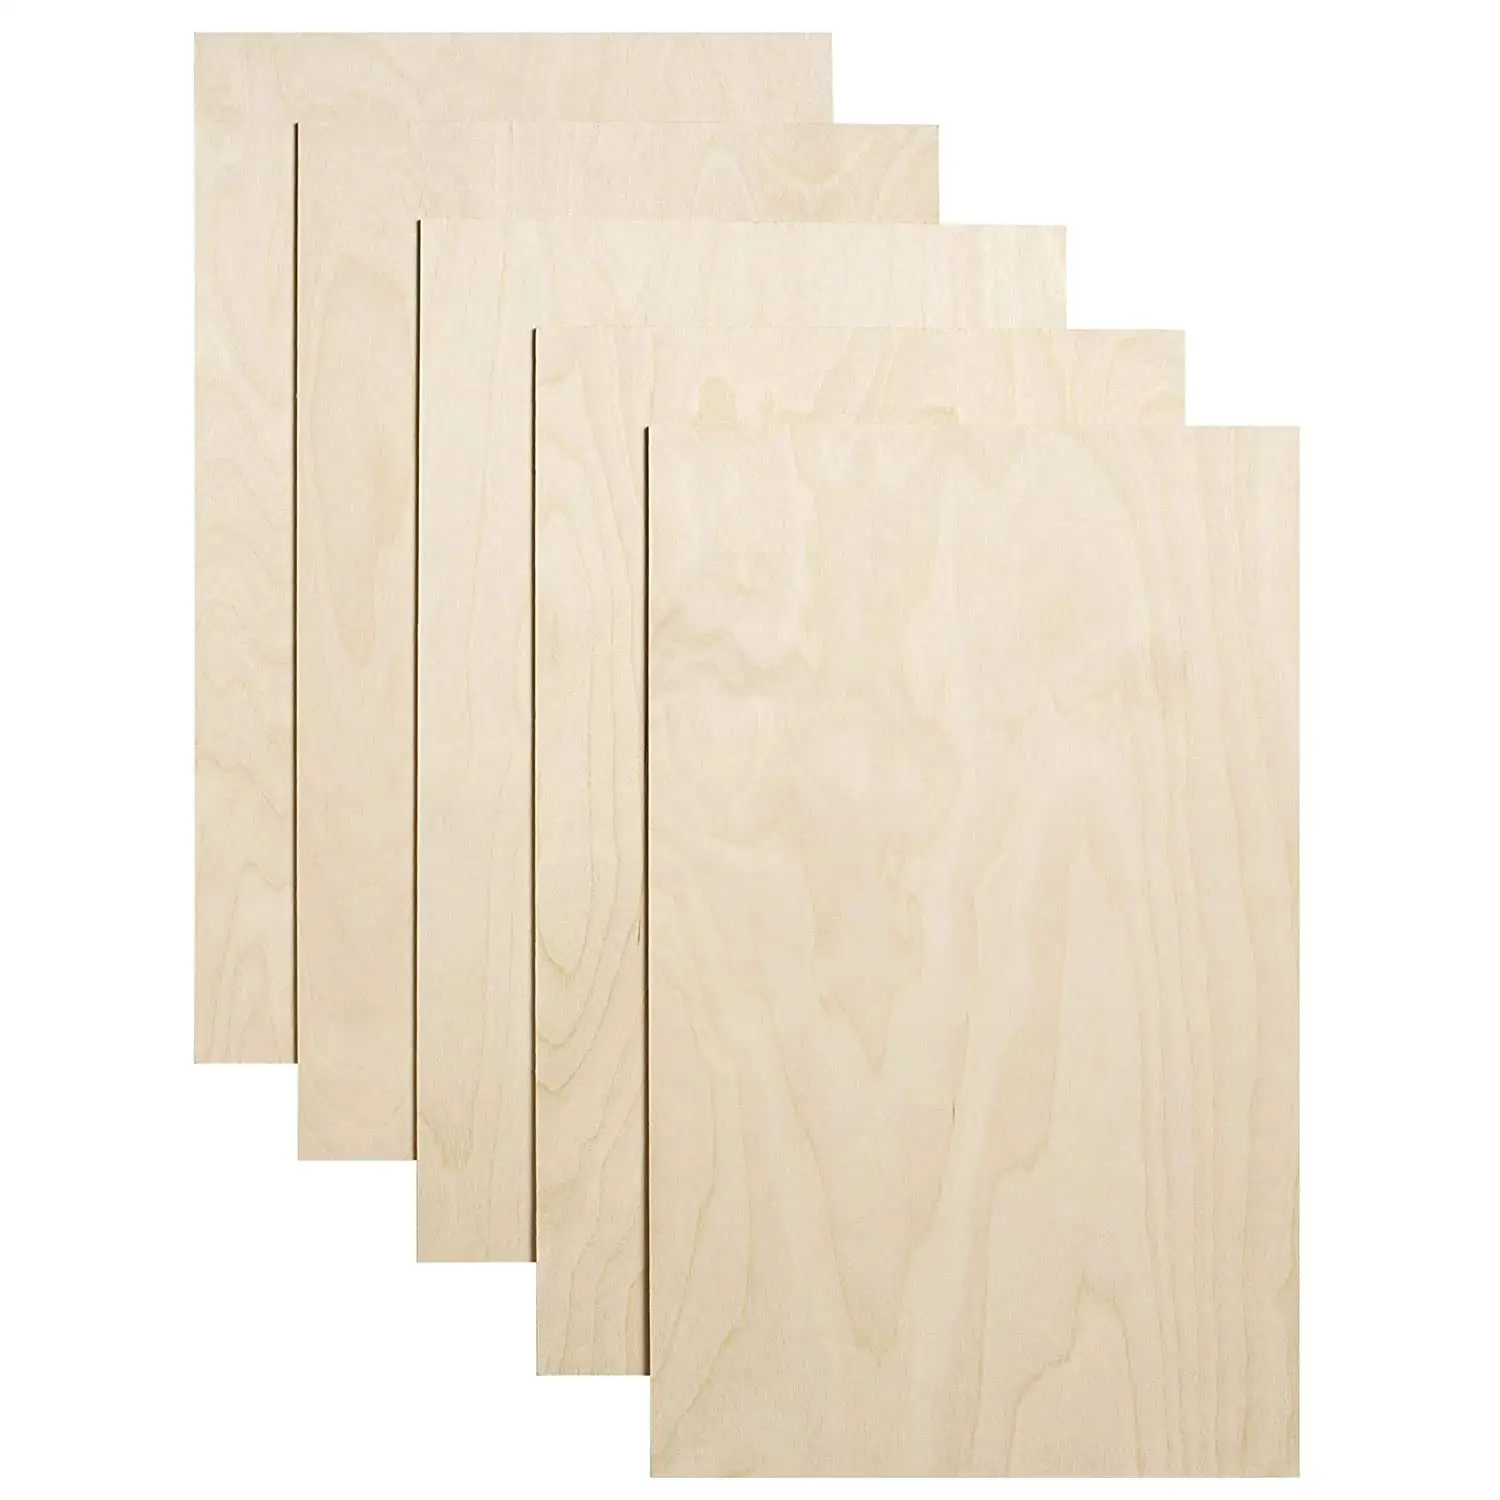 Birch Plywood Sheets Woodworking craft pyrography 12mm Thick Set of 5 